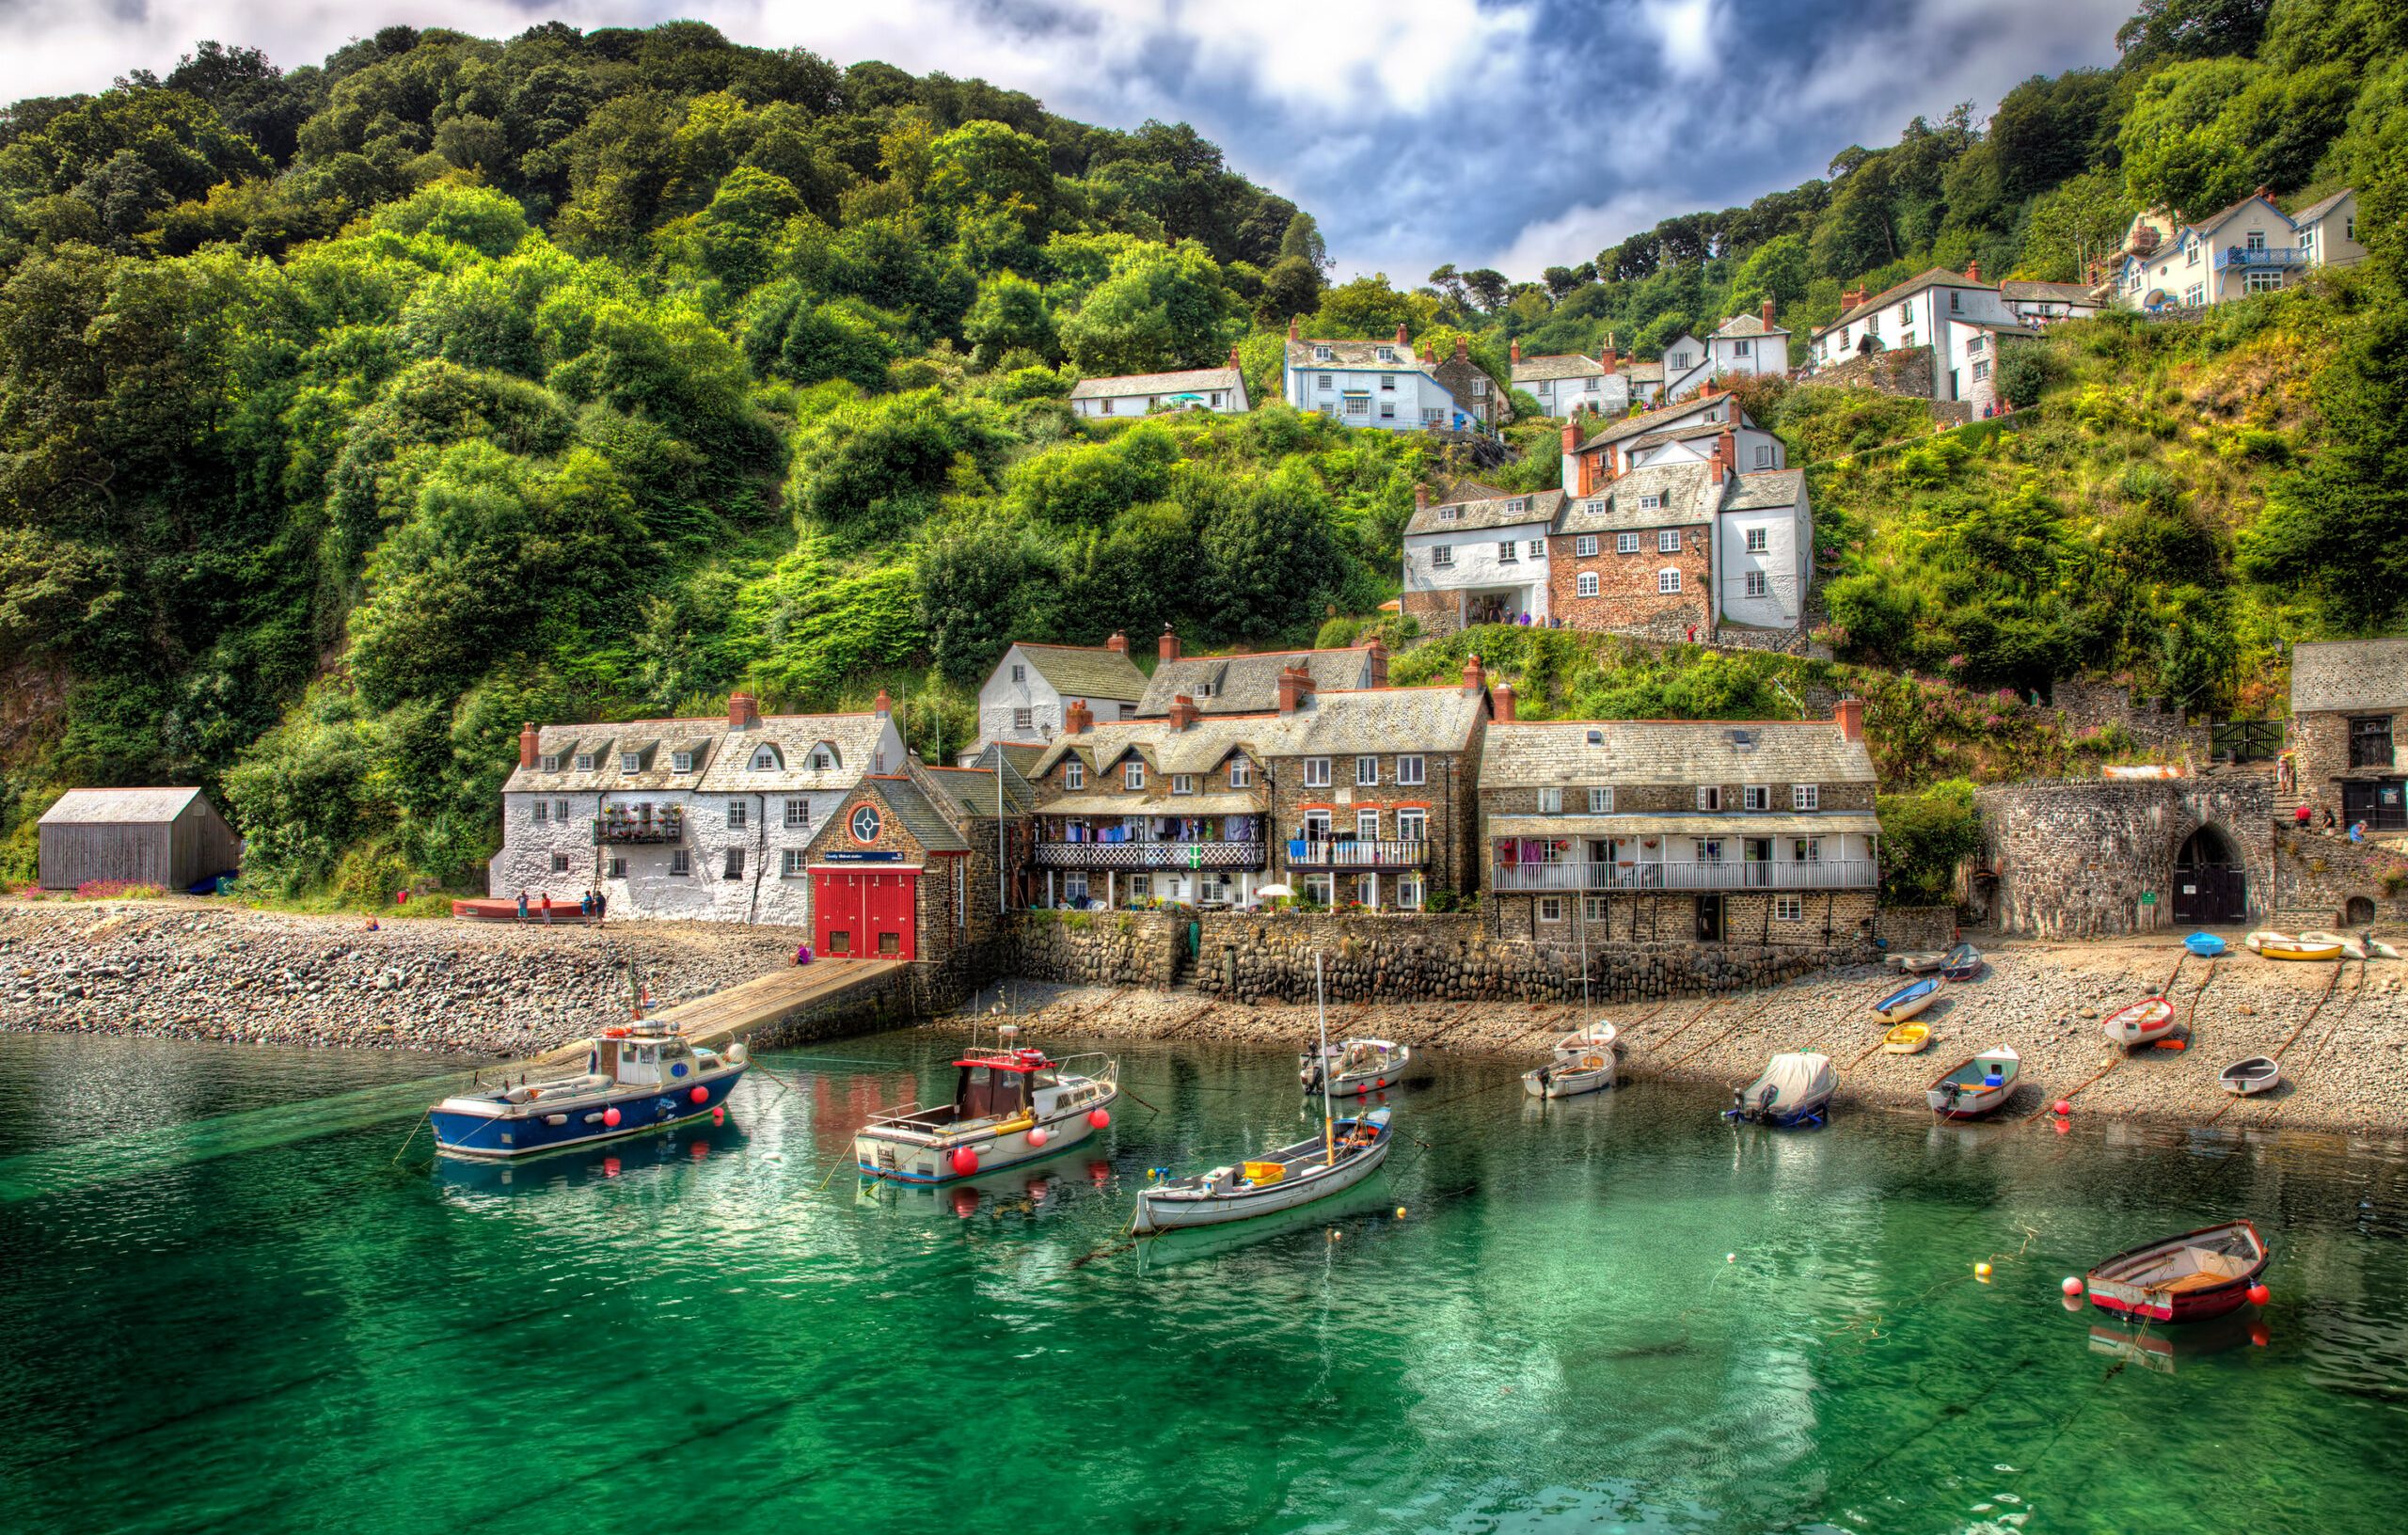 From the Beautiful Fishing Port of Clovelly in Devon